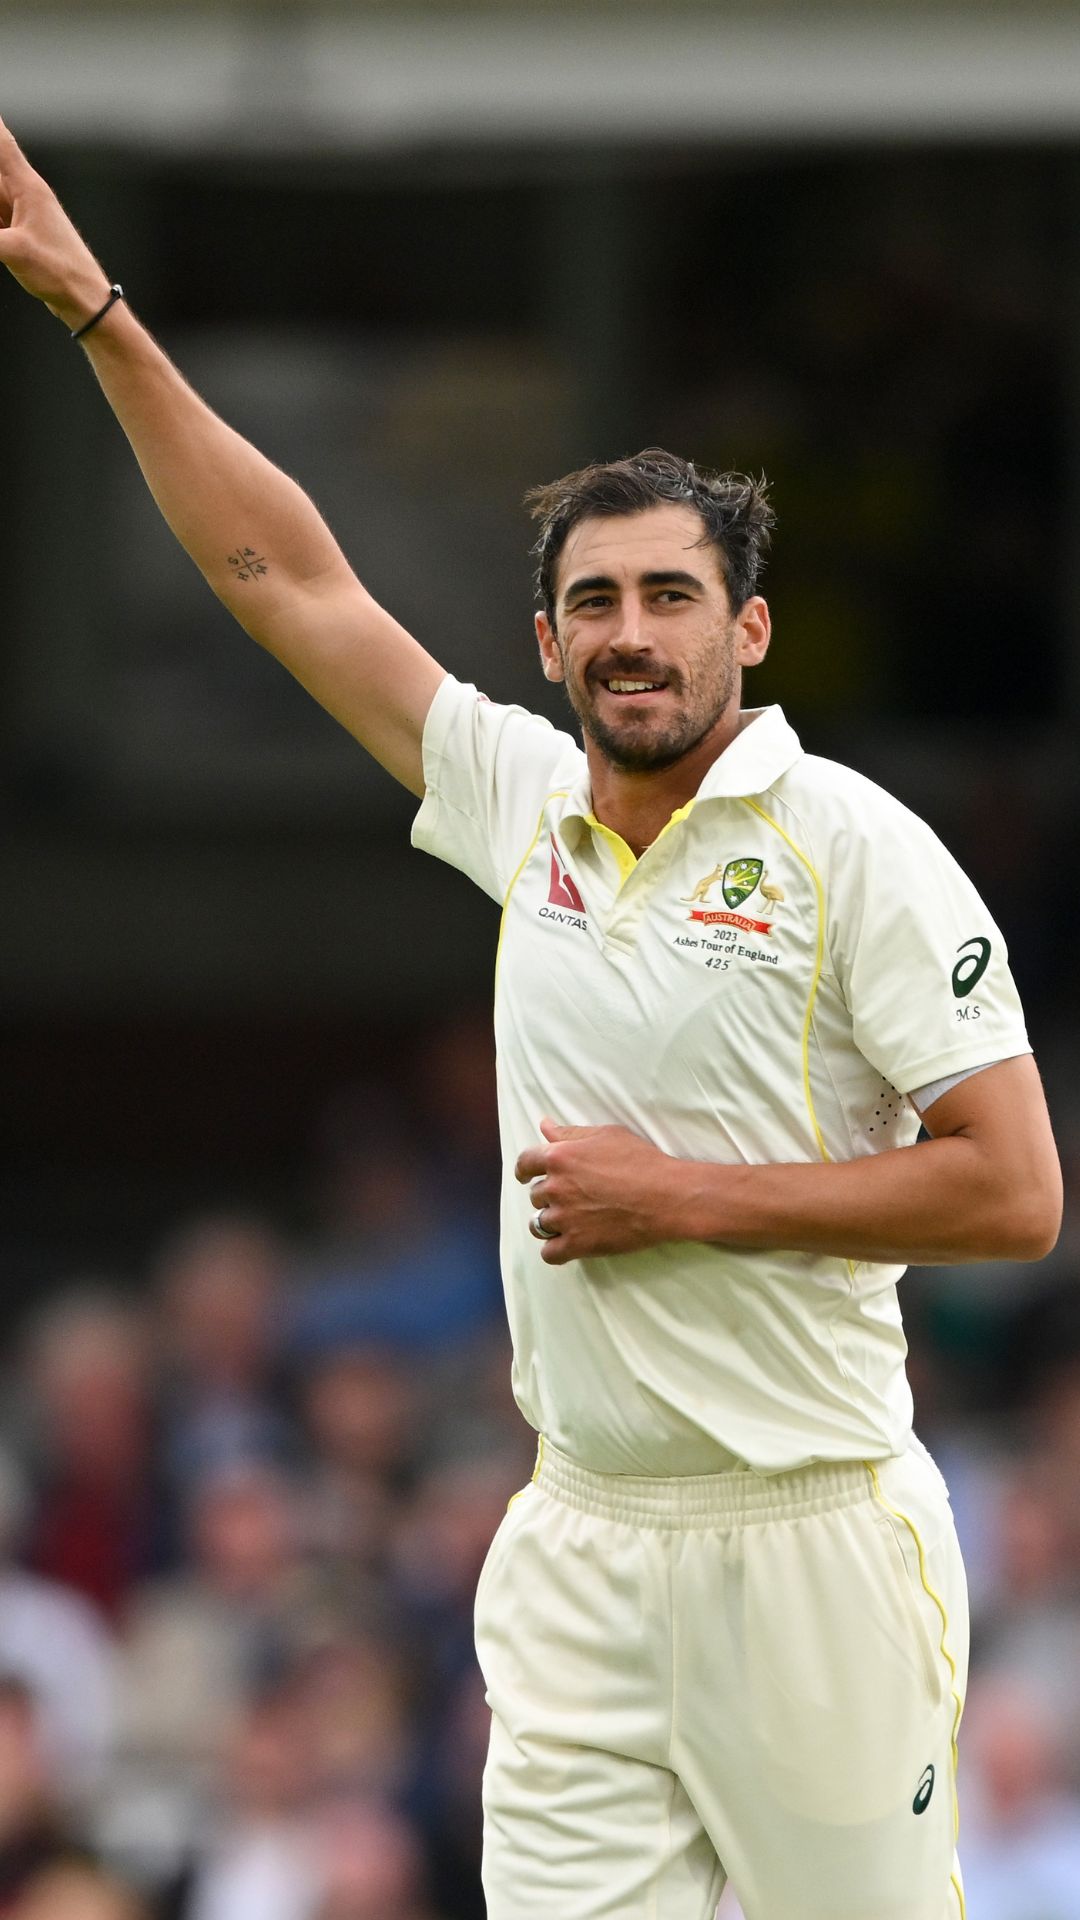 Bowlers to take most wickets as bowled in international cricket, Mitchell Starc surpasses James Anderson